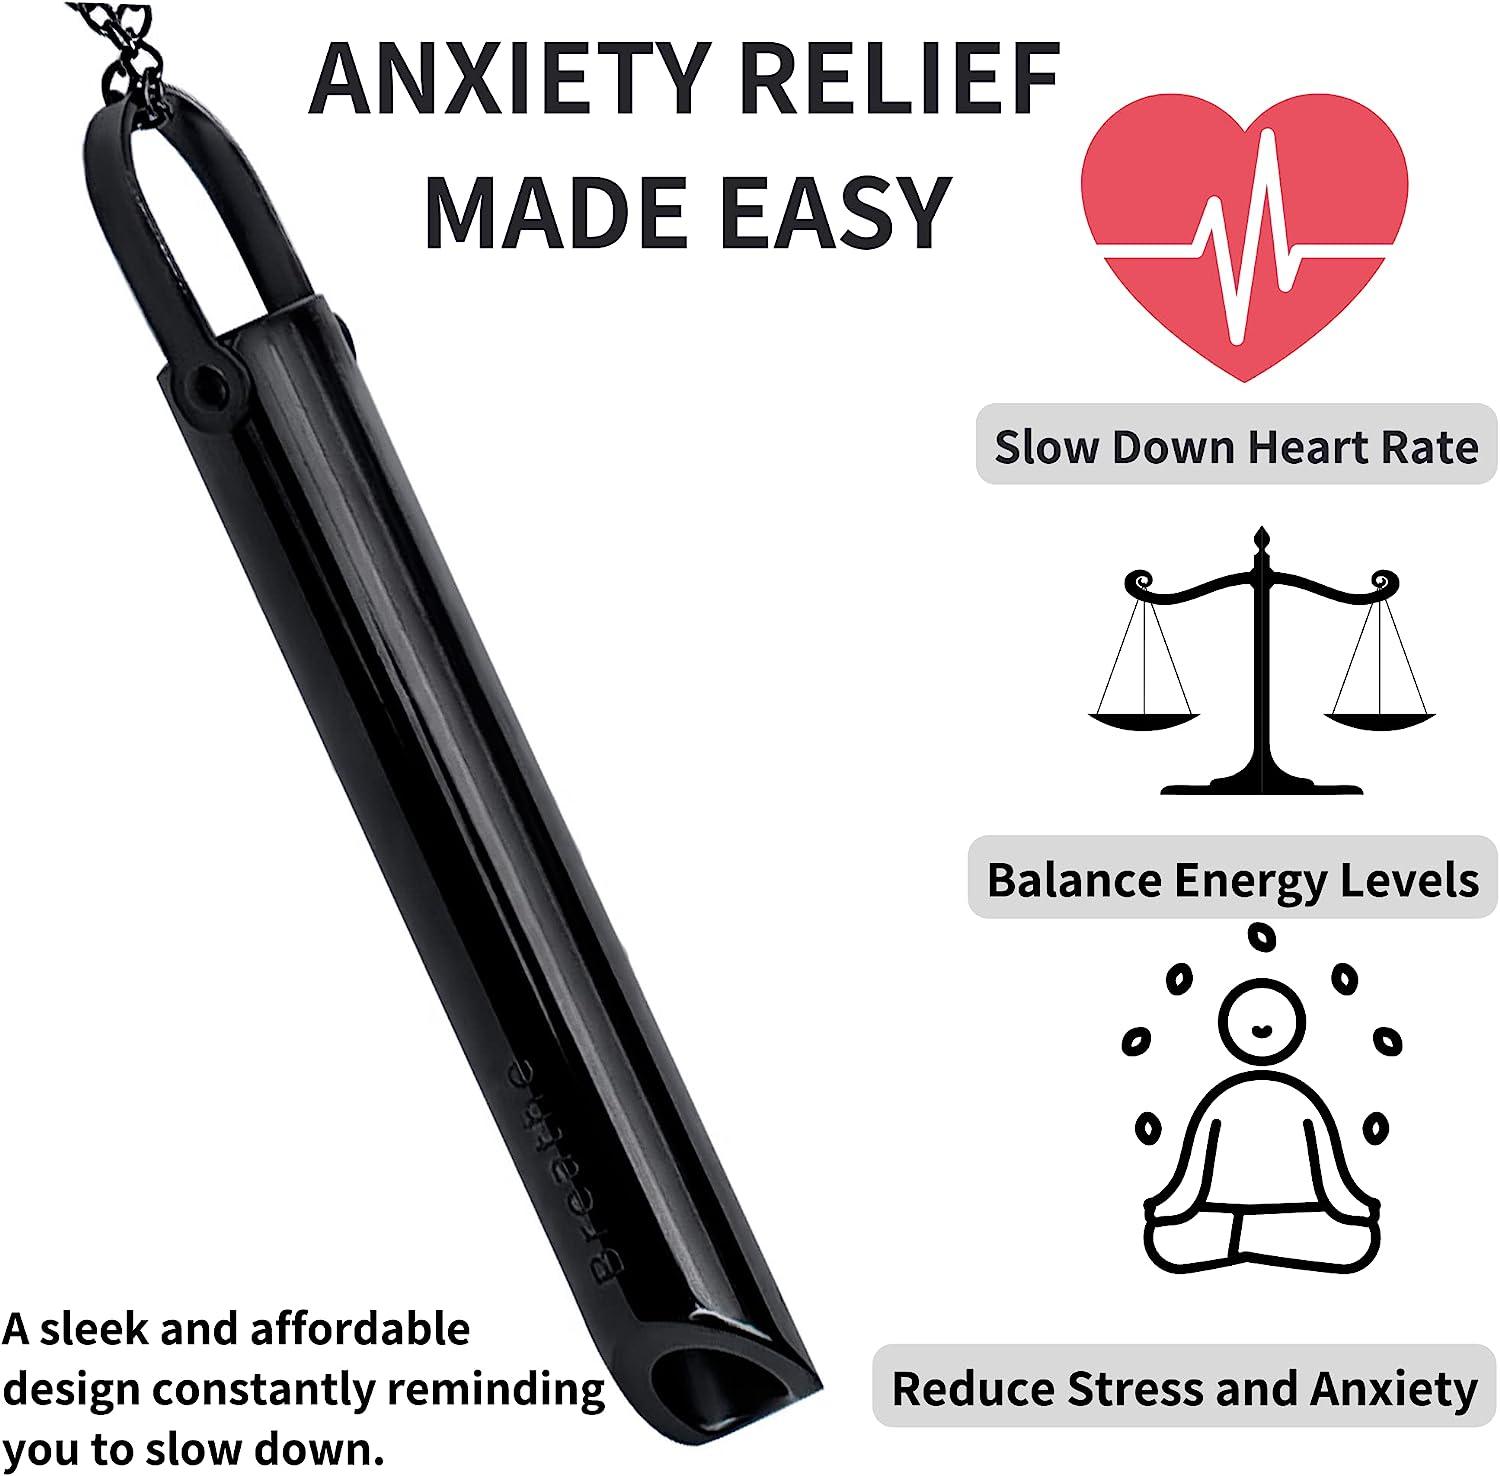 Meditation Accessories Made Easy│HealthyLifecycle